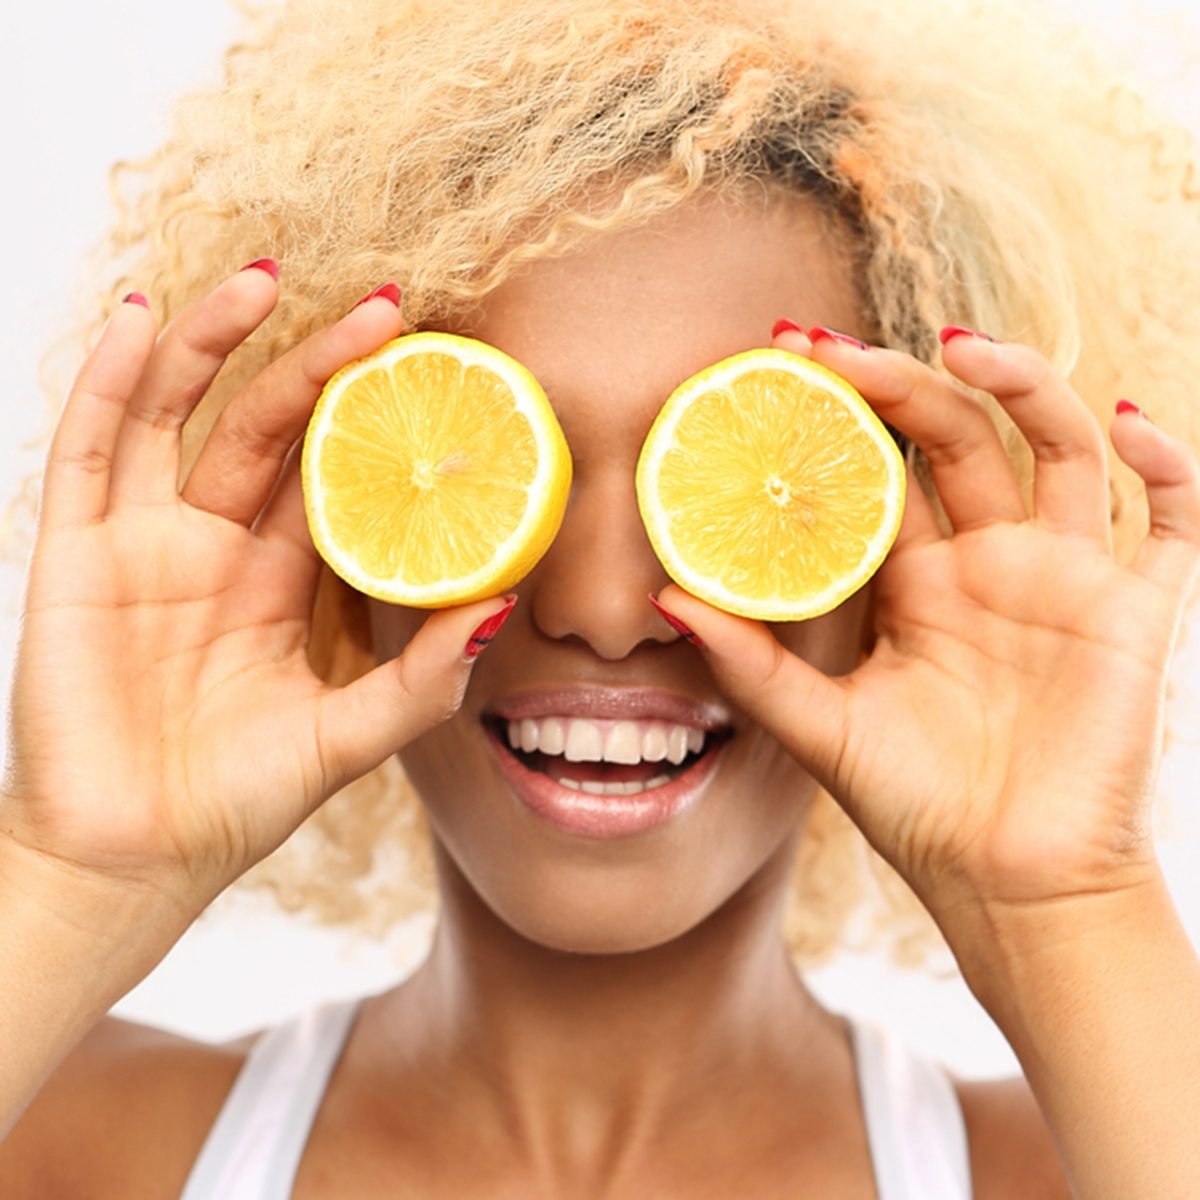 9 Health and Beauty Benefits of Lemon You Need to Know | Taste of Home